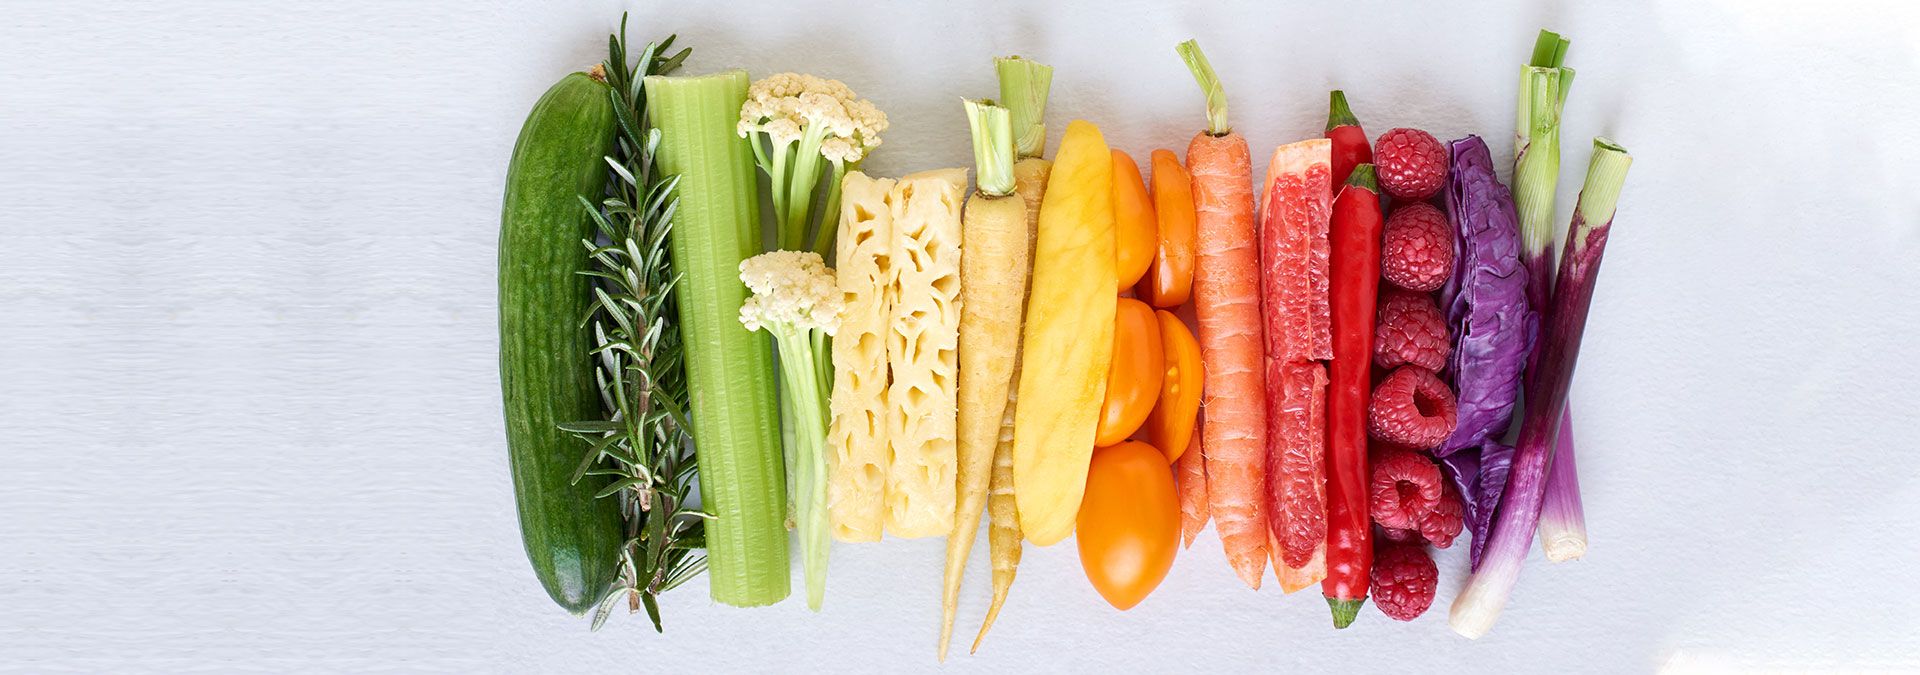 Vegetable and fruits banner 